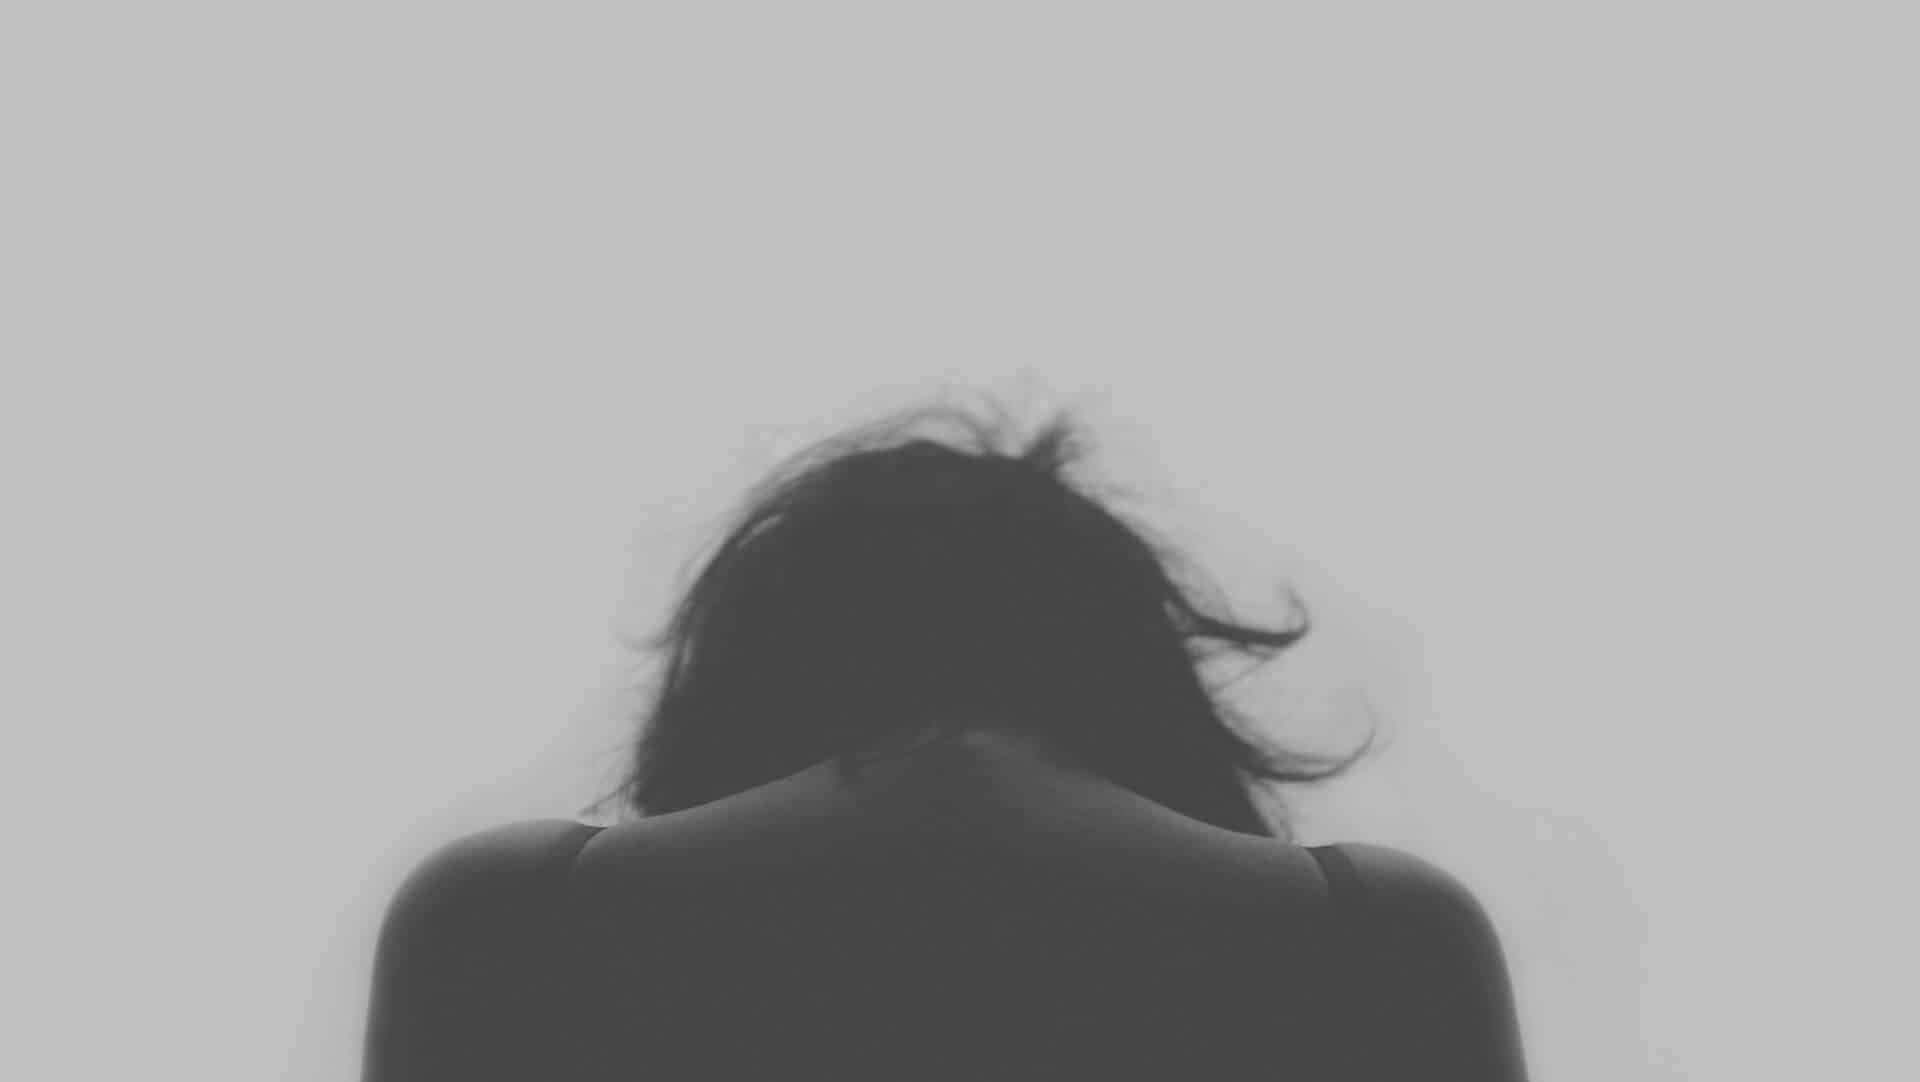 From the back, a woman bowing her head in sadness